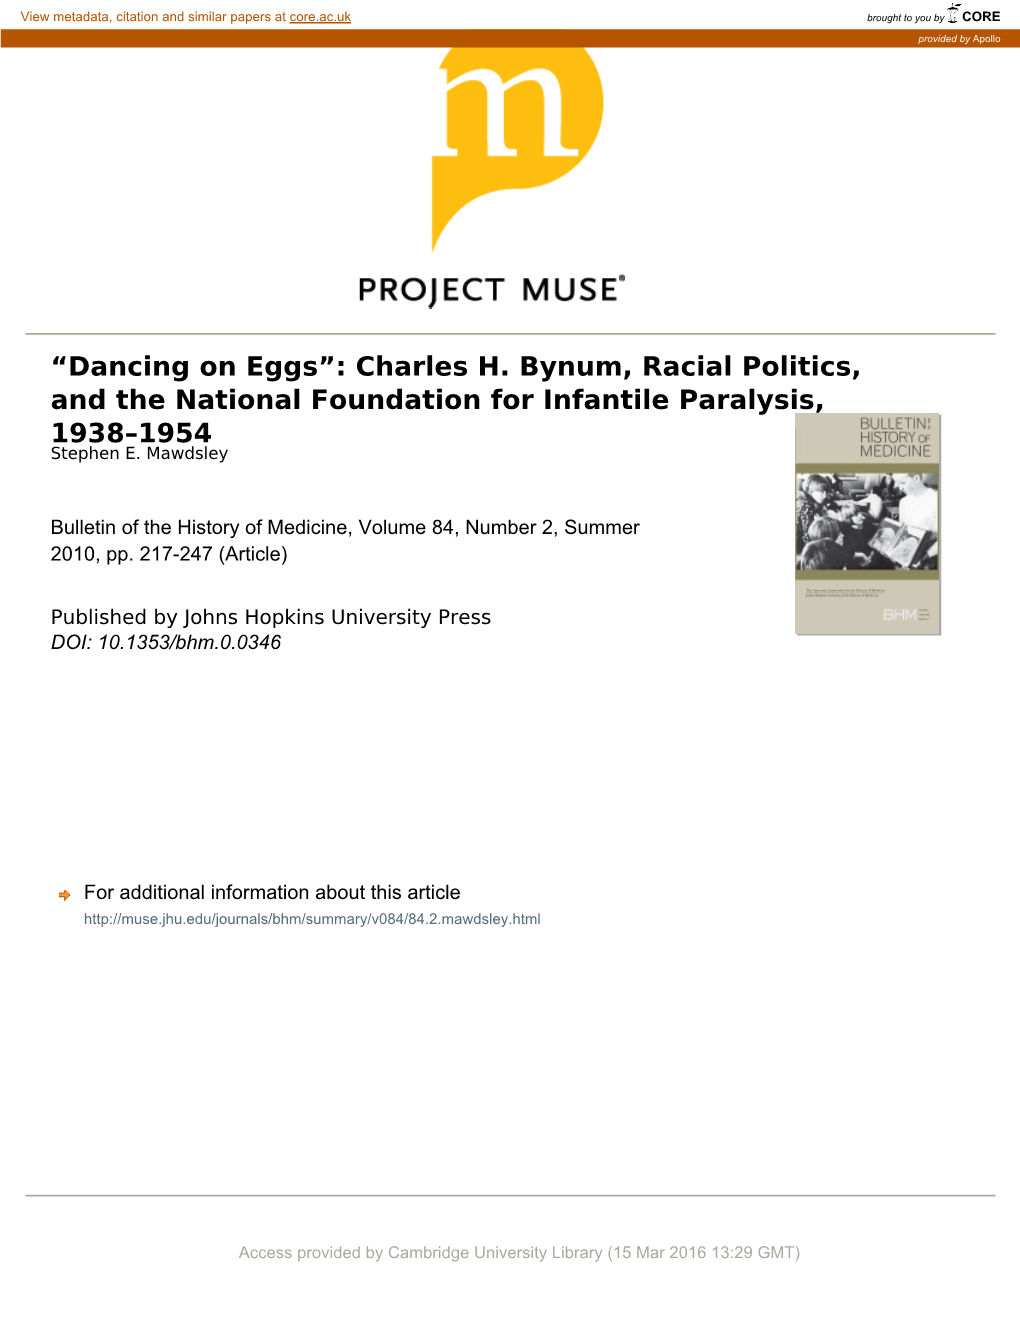 Charles H. Bynum, Racial Politics, and the National Foundation for Infantile Paralysis, 1938–1954